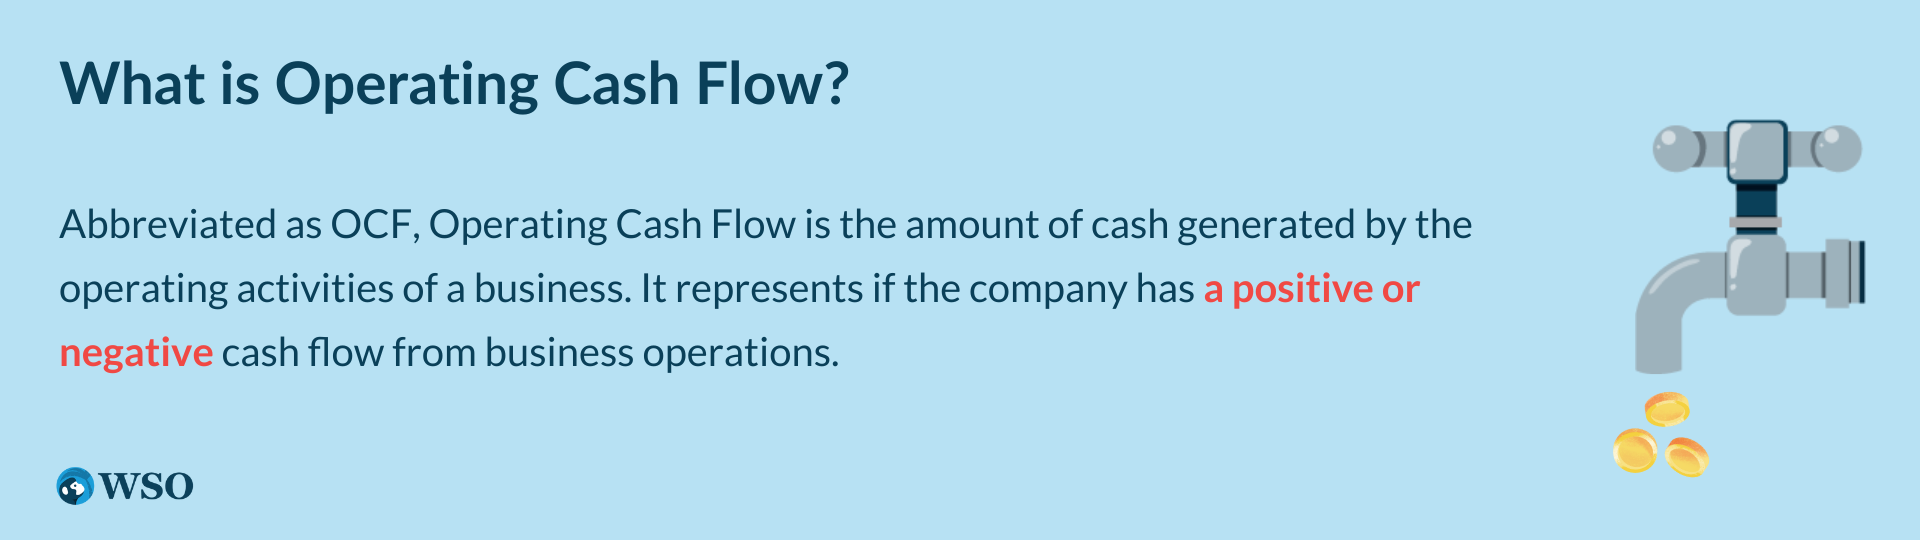 What is Operating Cash Flow?